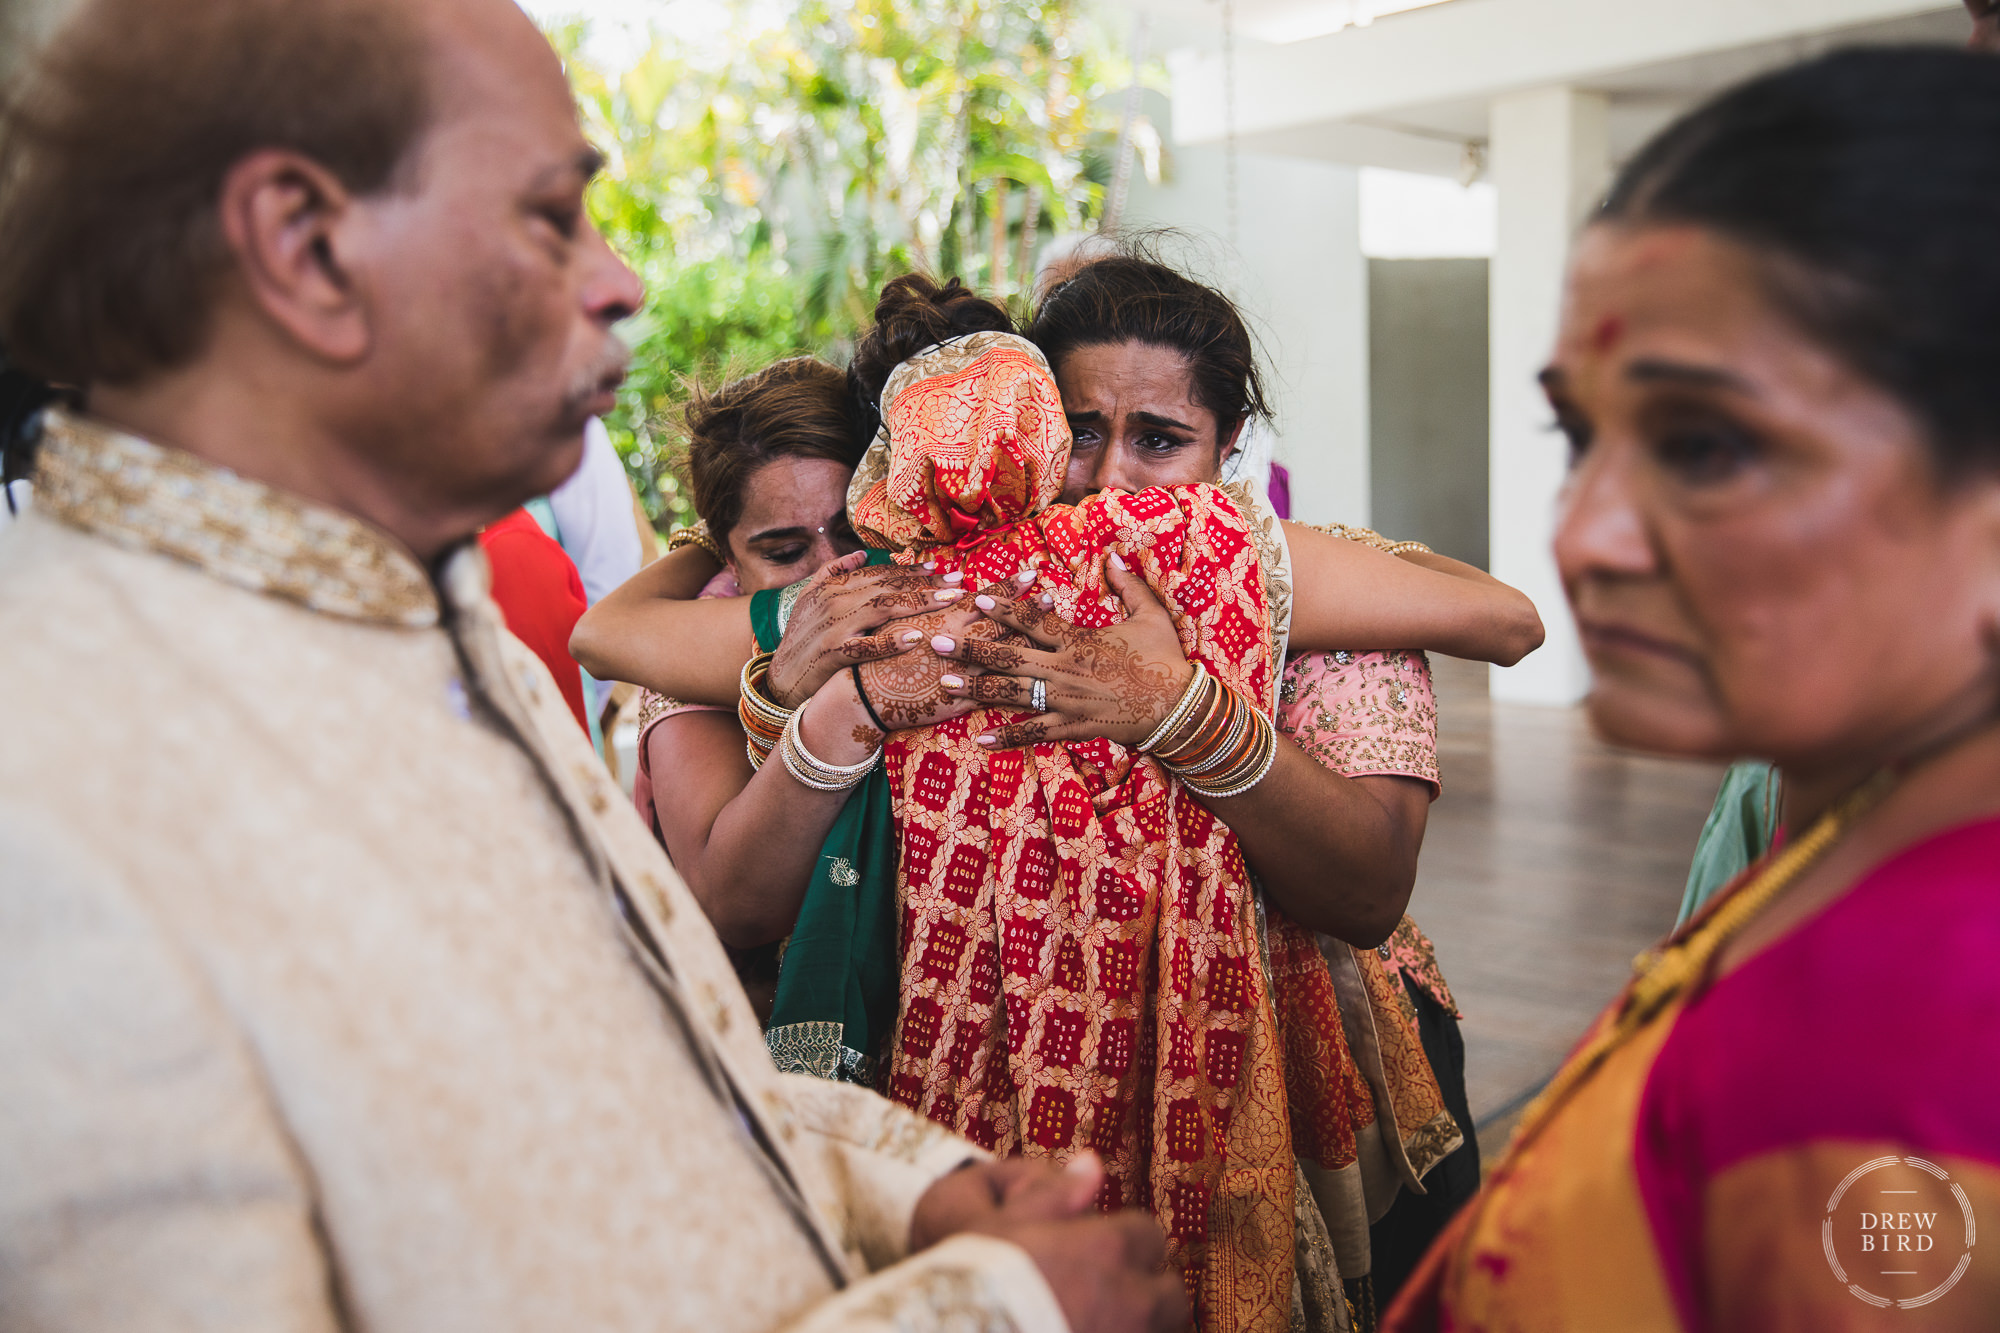 During the Vidiaa ceremony the bride embraces both of her sisters for a group hug. One of her sisters has tears in her eyes and the bride's parents are blurred out in the foreground during this Hindu wedding ceremony tradition. The moment is artistically and genuinely captured as a documentary style wedding photo by SF photographer Drew Bird who specializes in Indian and South Asian weddings. This is a destination Indian wedding in Aruba.